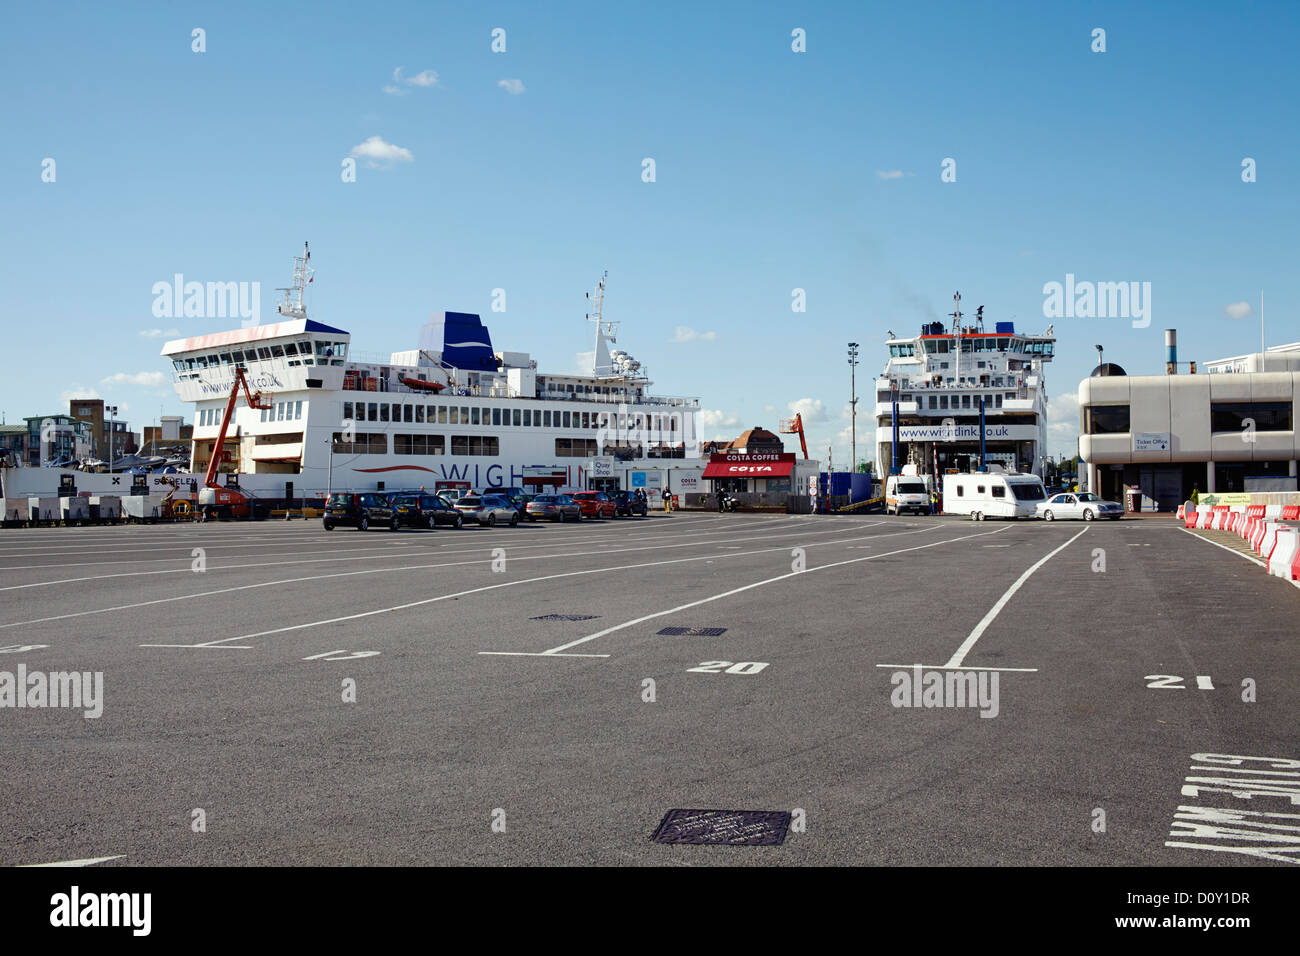 Wightlink ferry terminal at Portsmouth, Hampshire UK Stock Photo